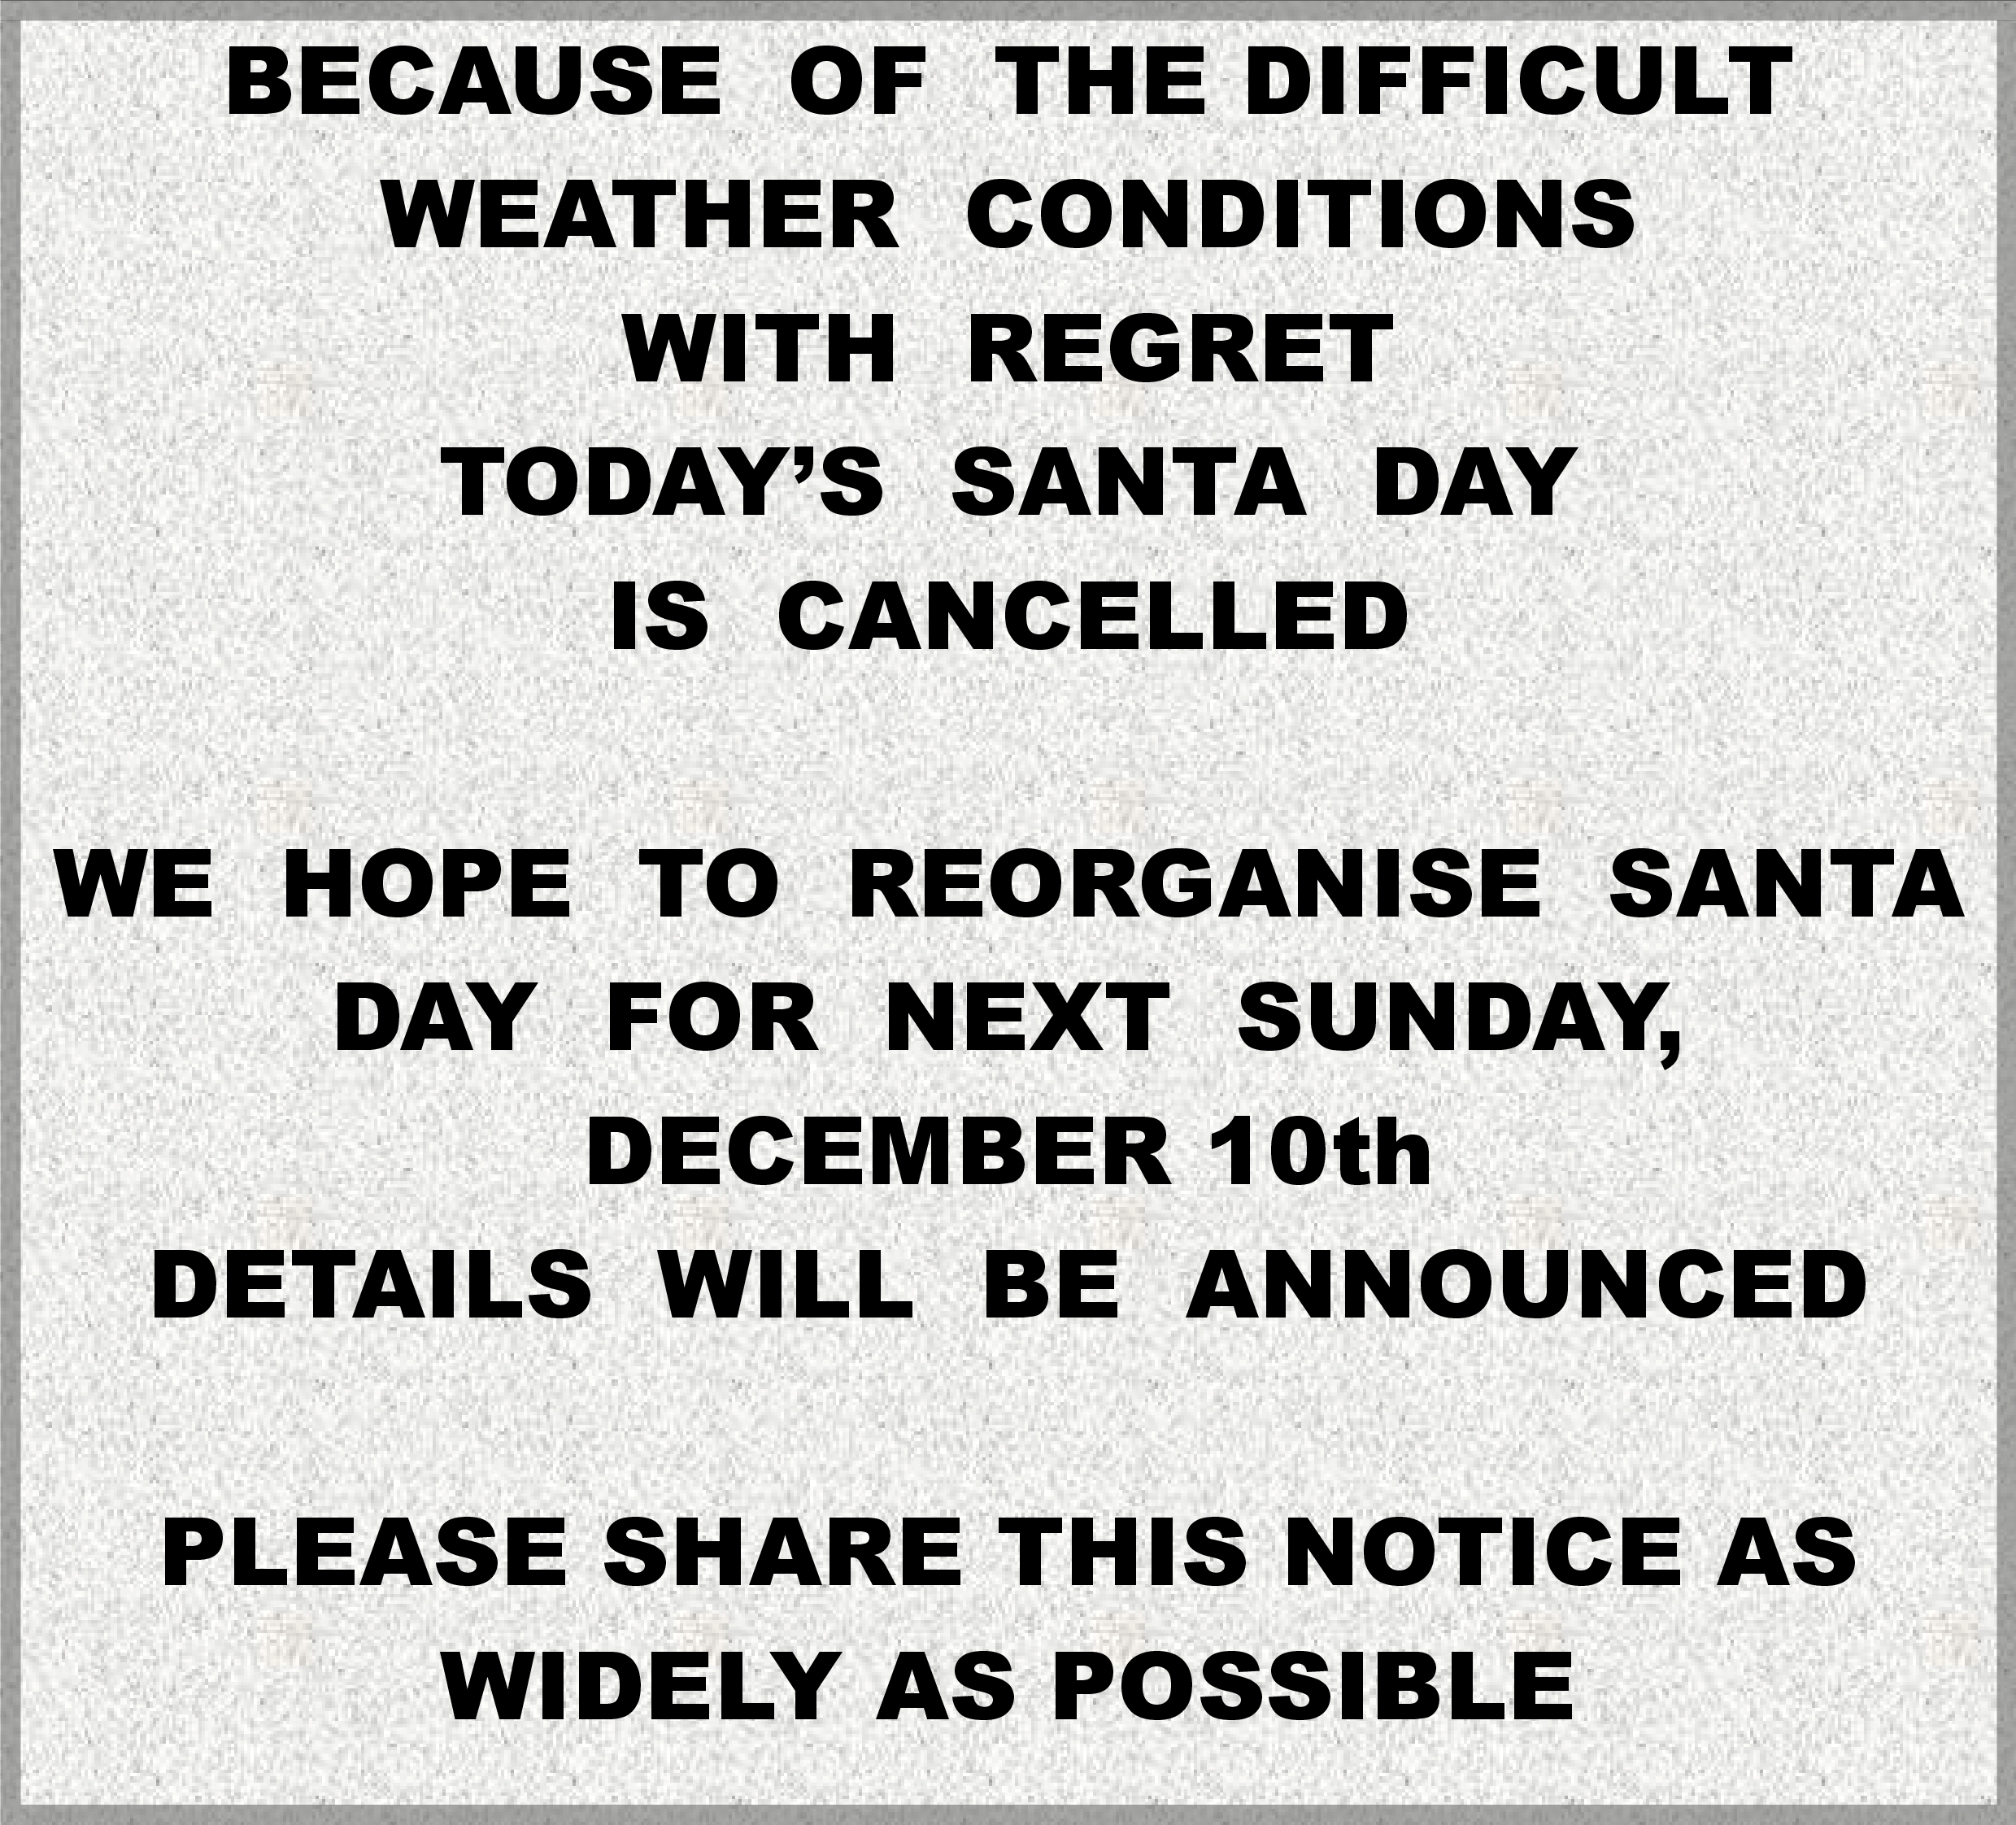 Santa Day is cancelled. We hope to rearrange for next Sunday (10th Dec)